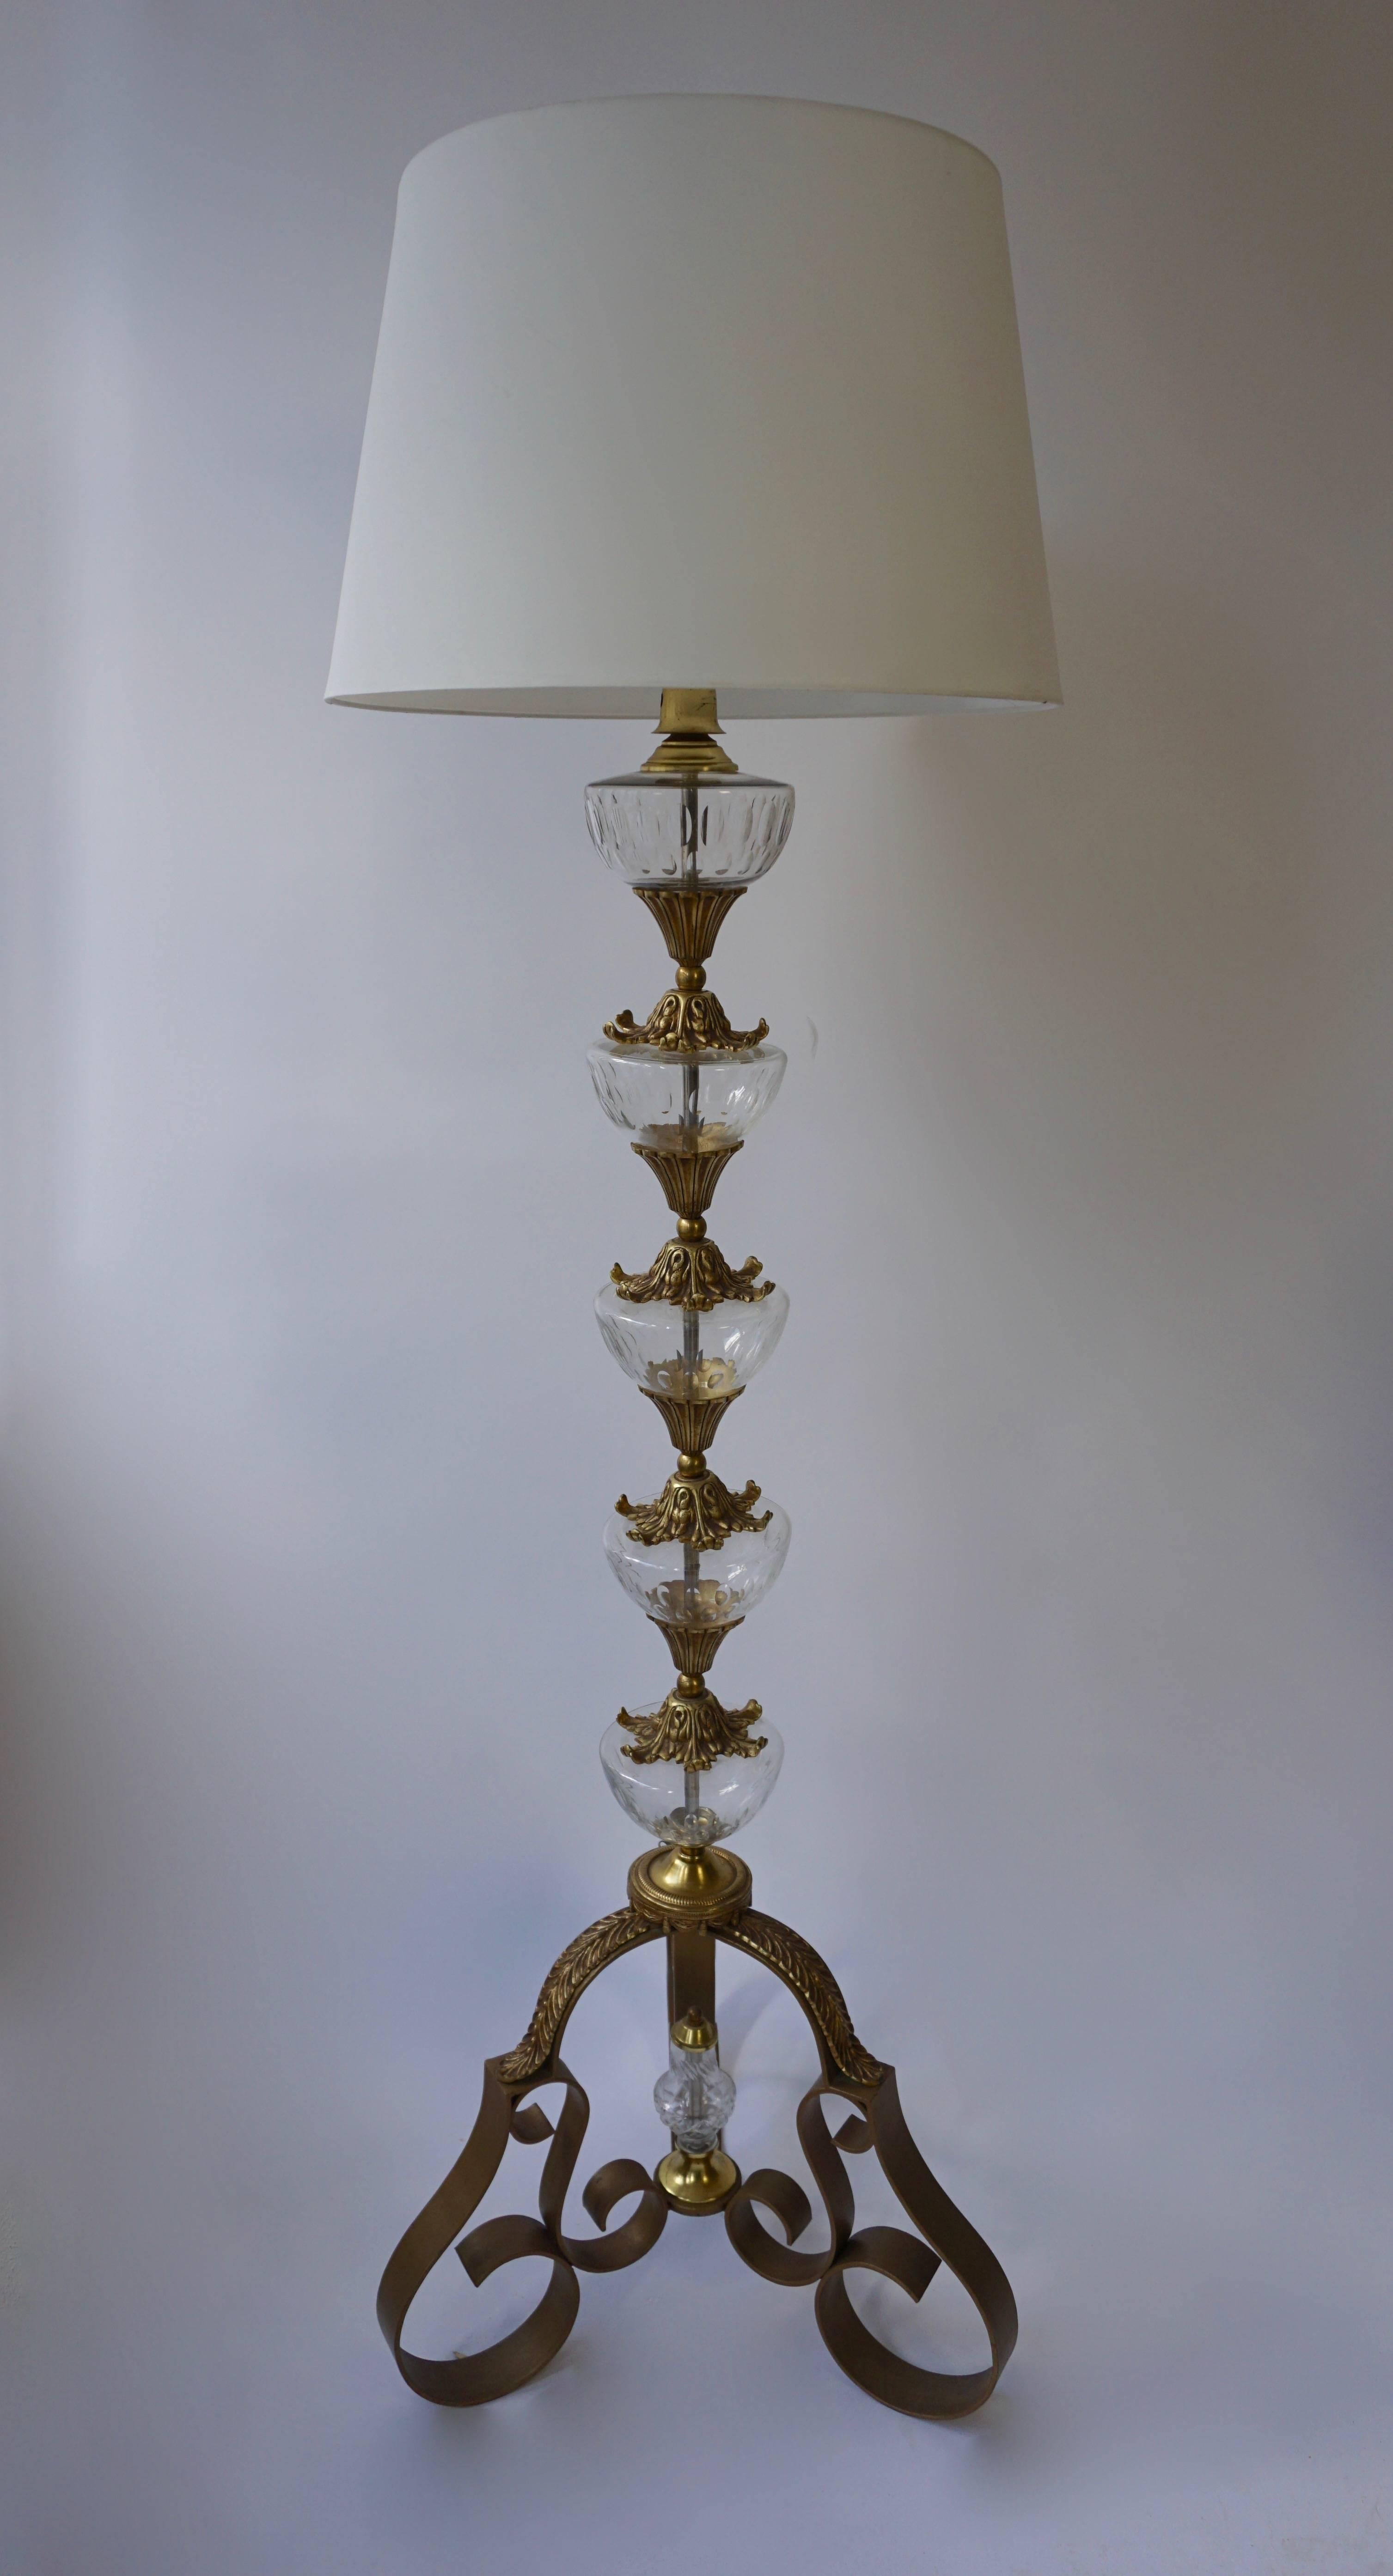 A rare and elegant lamp stand, resting on a wrought iron tripod foot with bronze palmette appliqués, the shaft composed of five cut crystal flat – top bowls linked together by bronze lambrequin ornaments,1940s.
Measures: Height lamp stand without